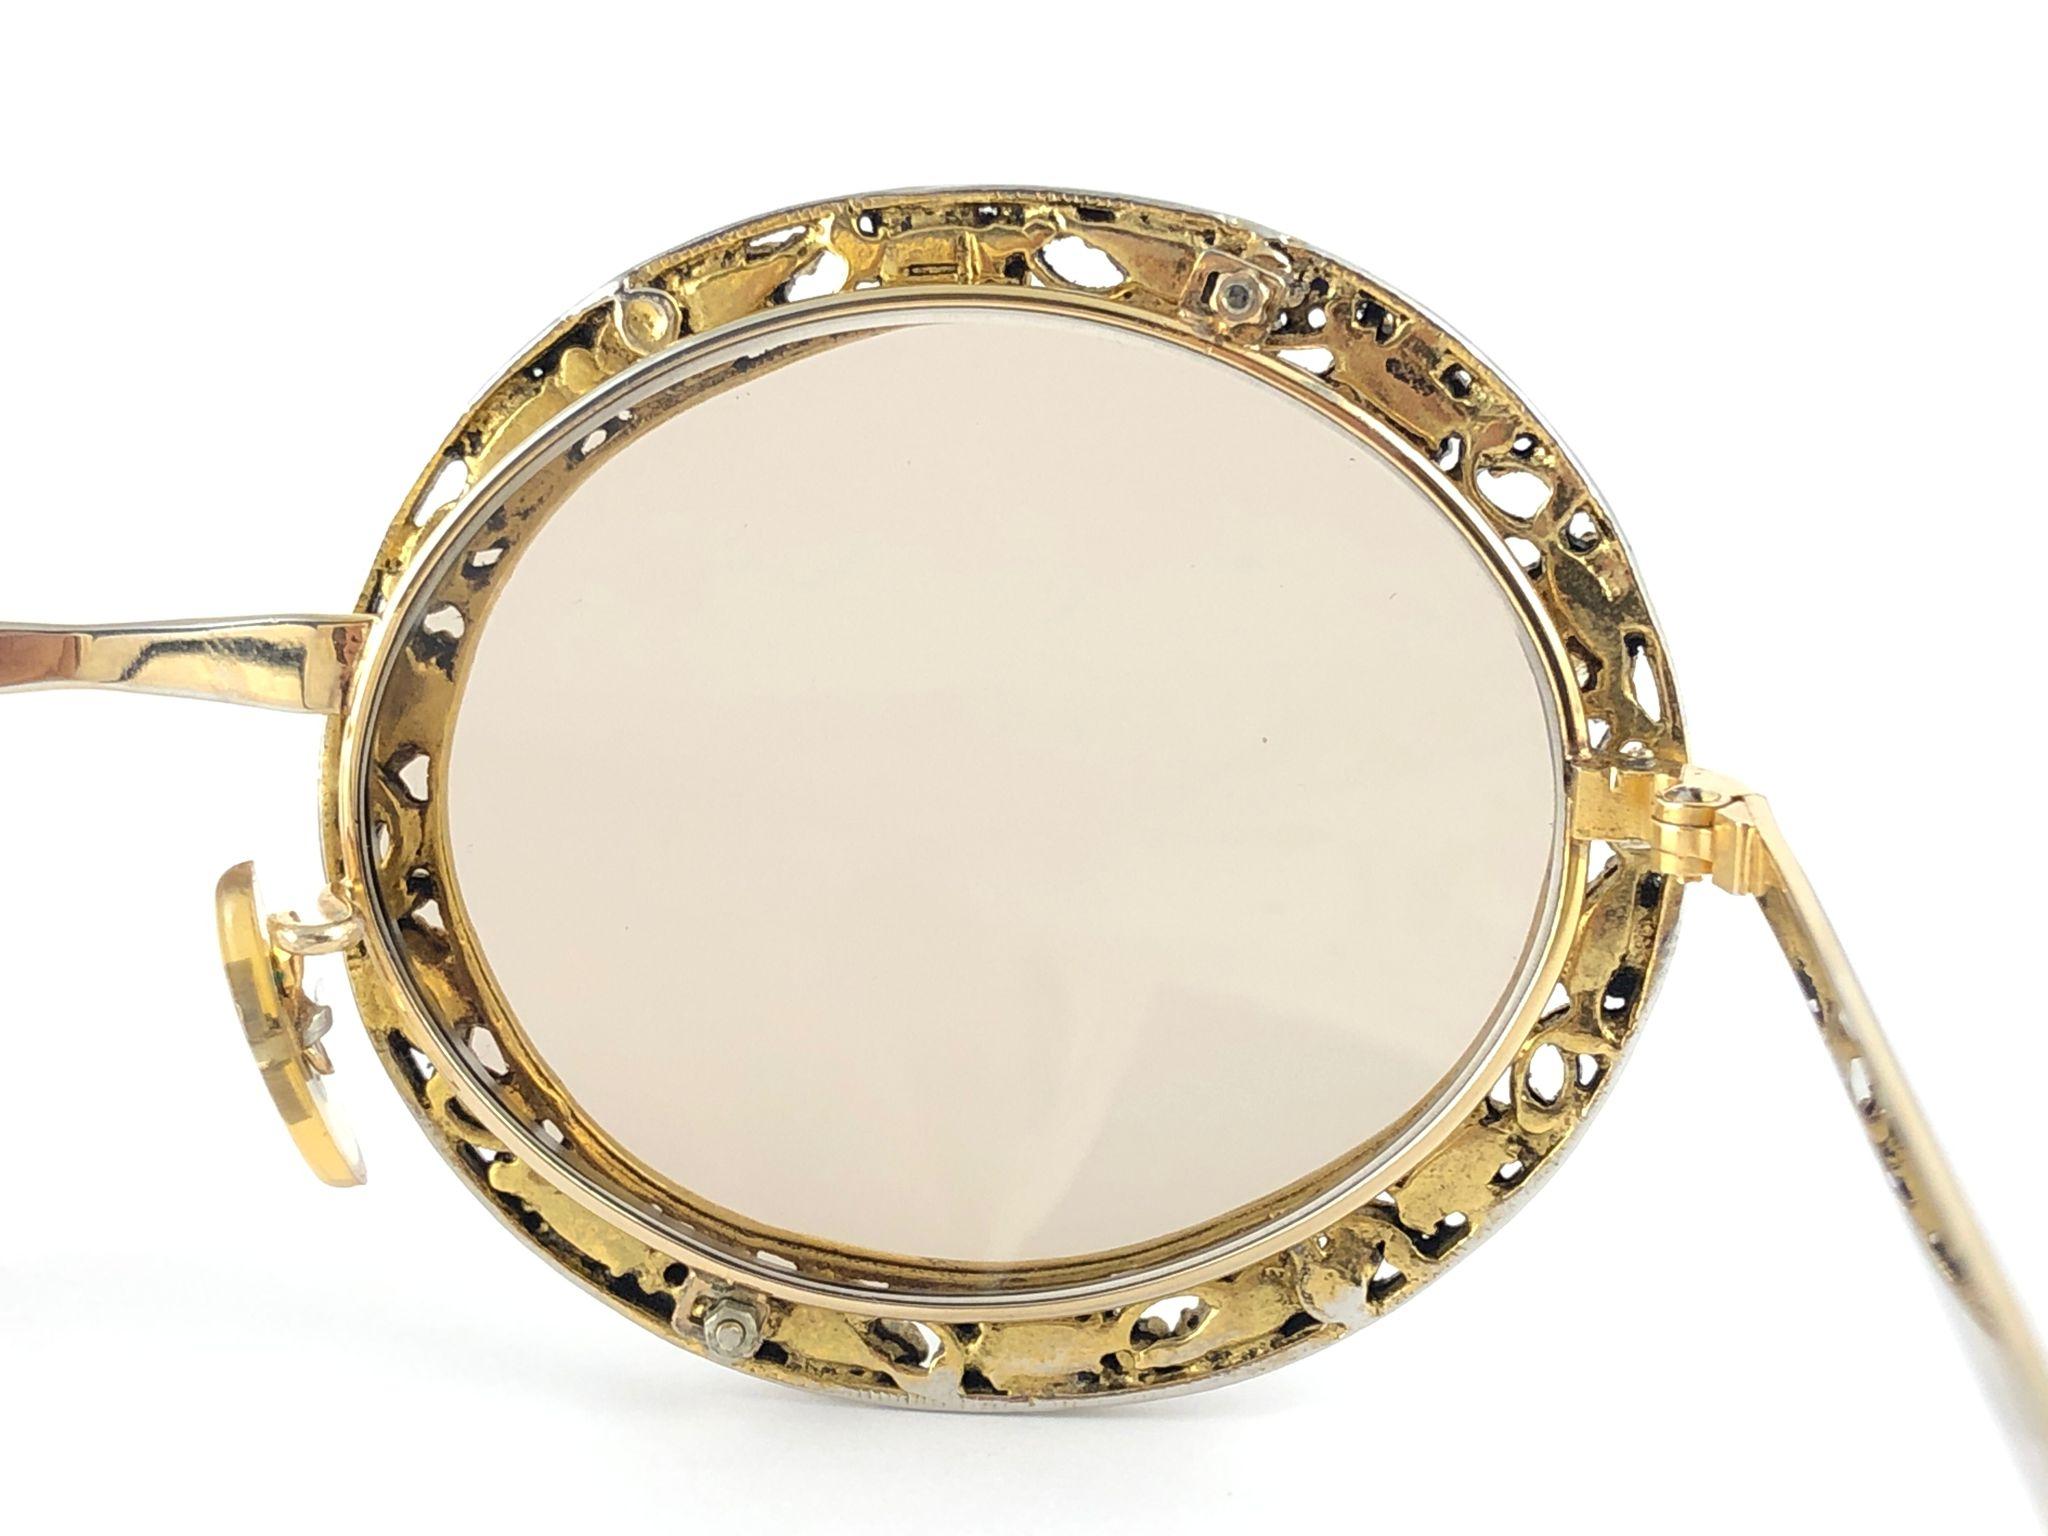 Ultra Rare 1960 Tura Jewelled Opal Accented Frame Archive Dior ...